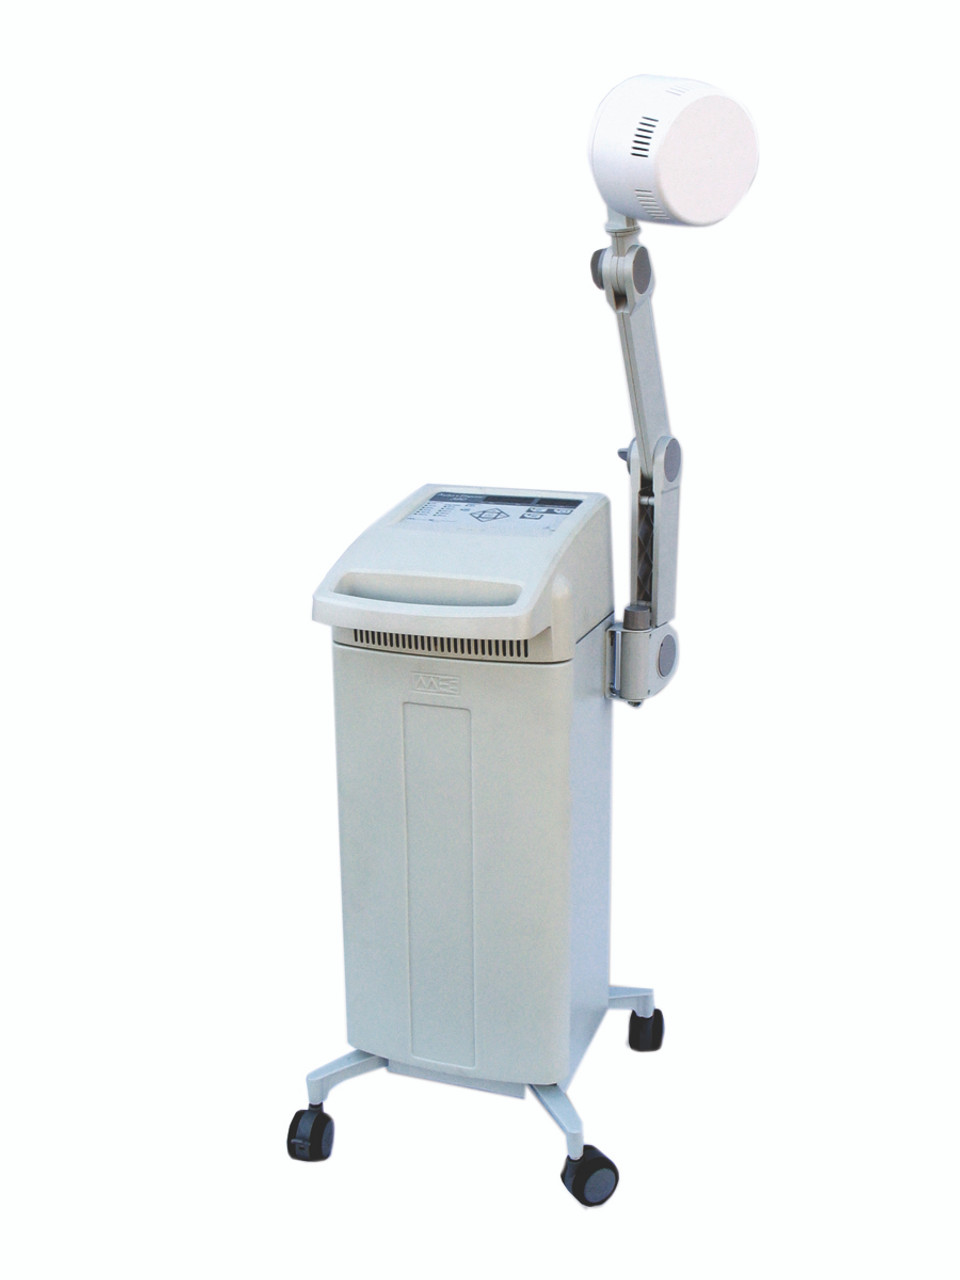 Mettler¨ Auto*Therm 391 shortwave diathermy w/14cm drum, multi-joint arm and cart